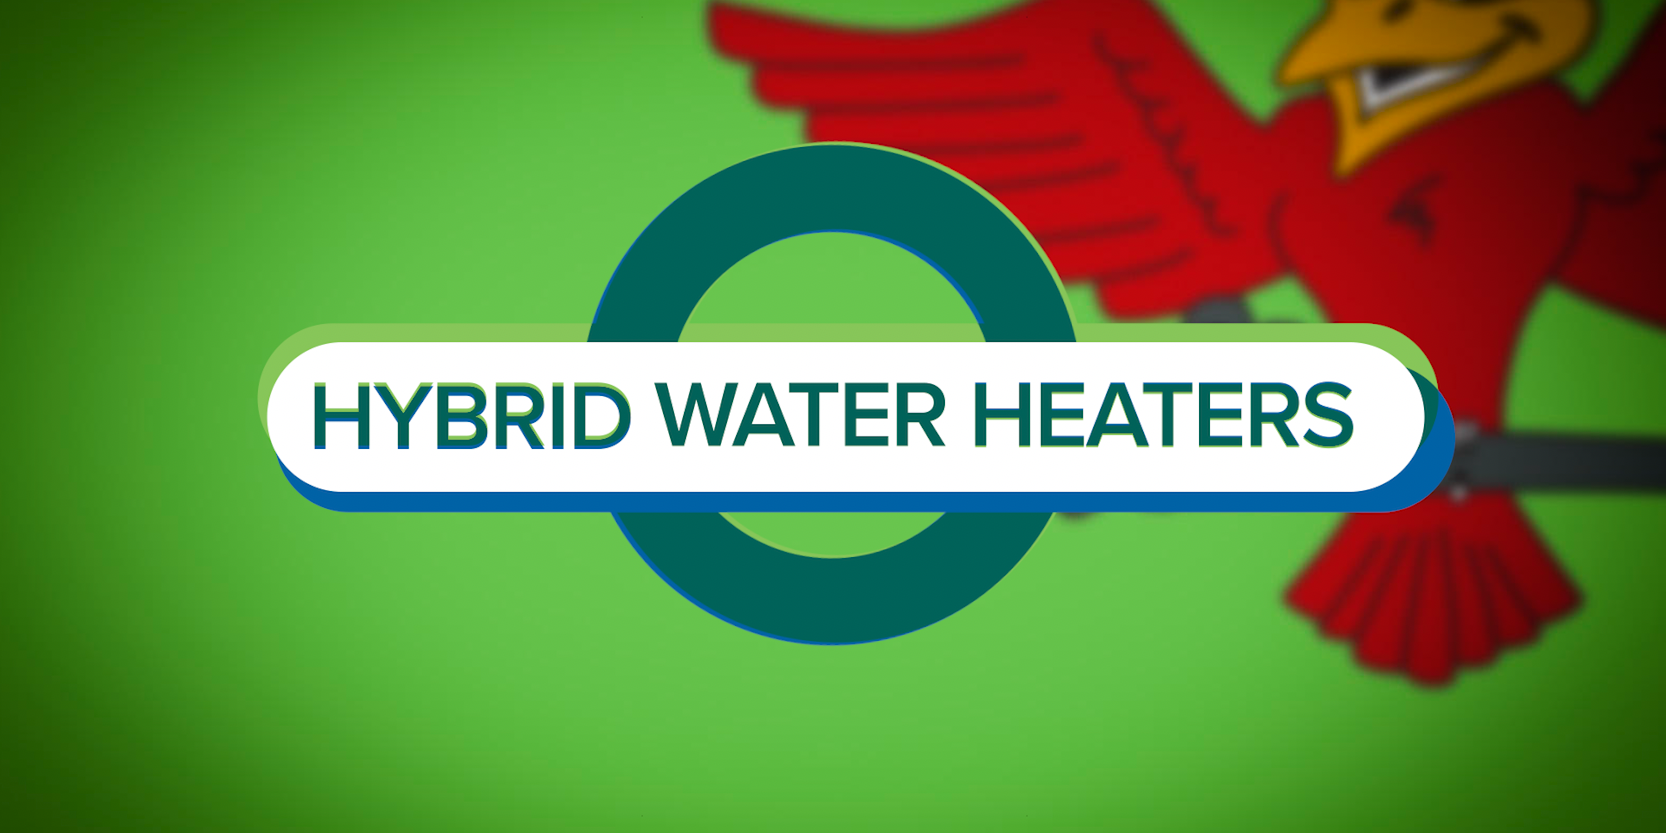 Cover photo for video "Hybrid Water Heaters"